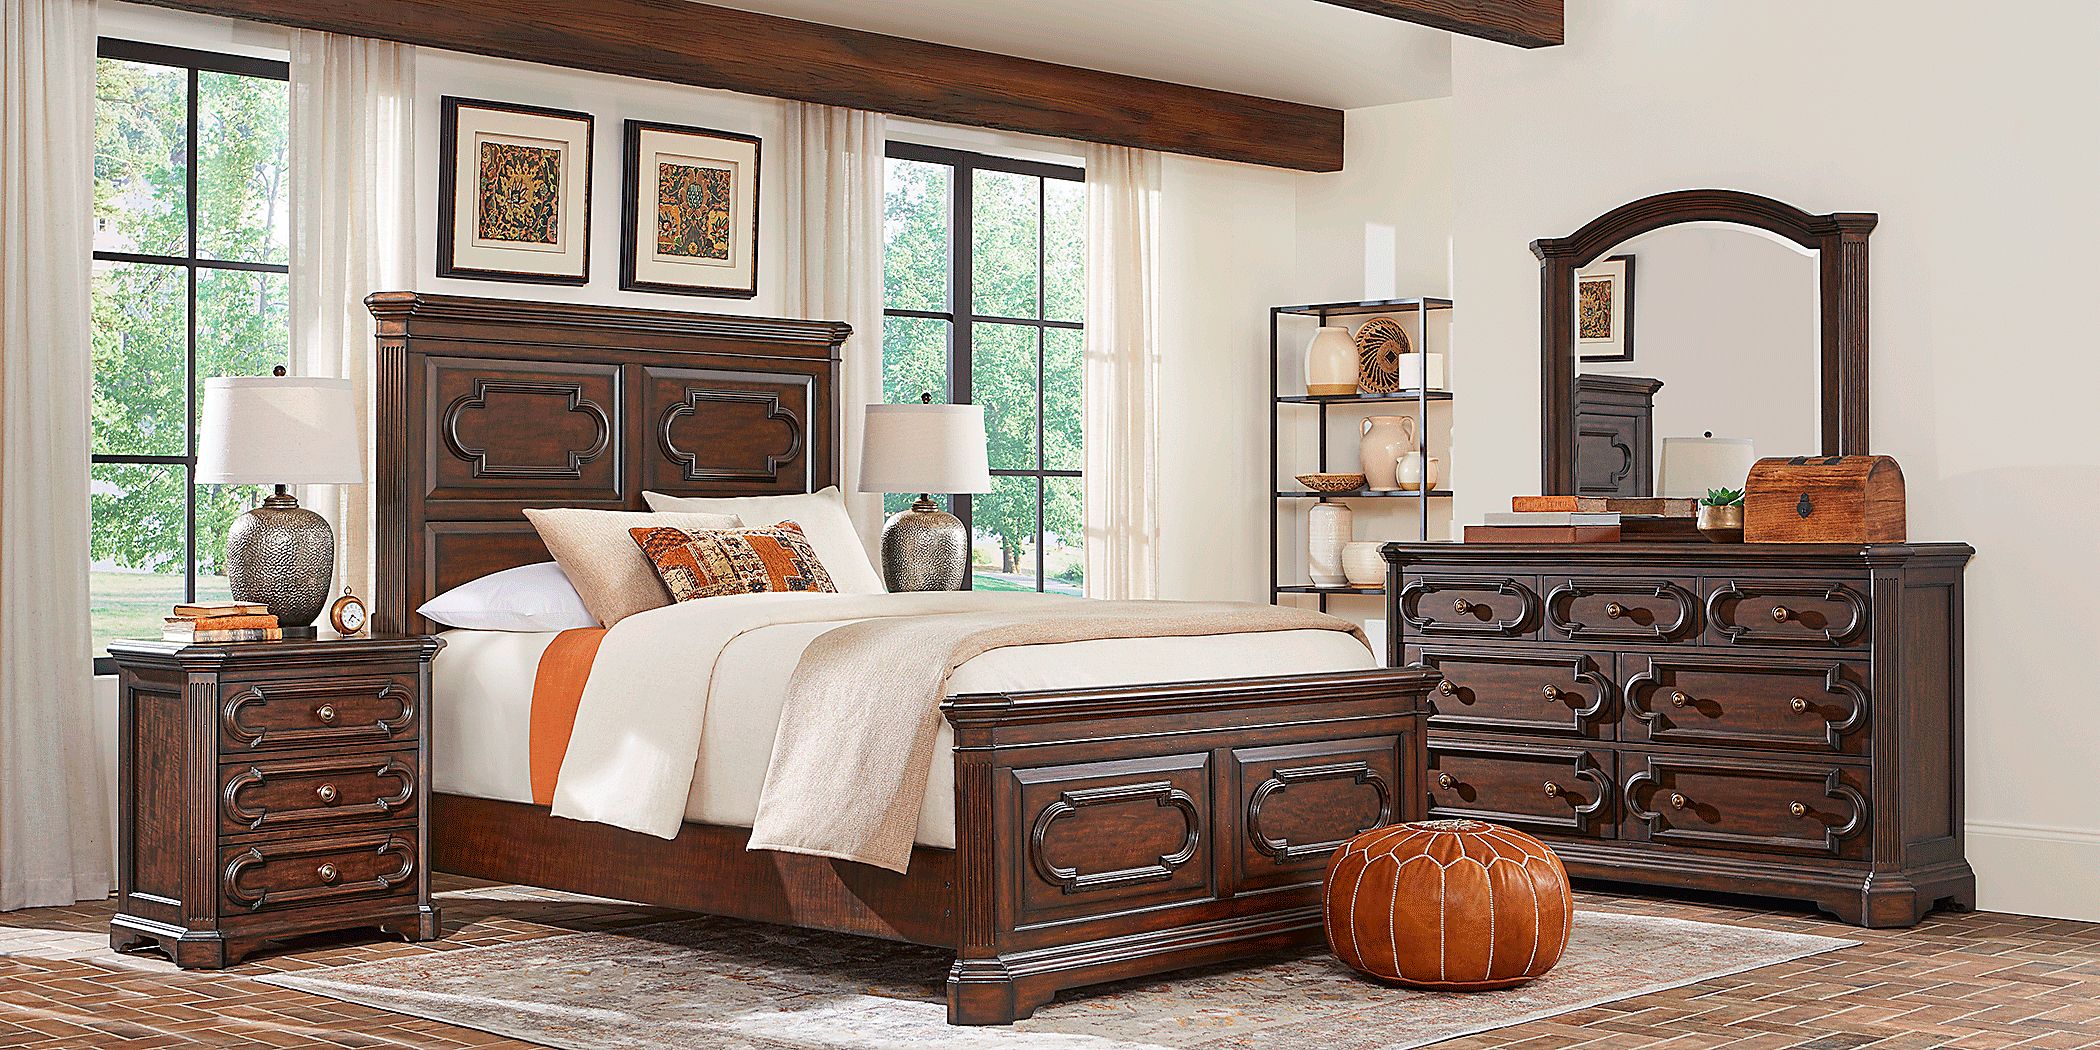 https://assets.roomstogo.com/product/lindenwood-saddle-5-pc-queen-panel-bedroom_3215948P_image-room?cache-id=2157a6ffc372b9a8ddbb794ea2016fcf